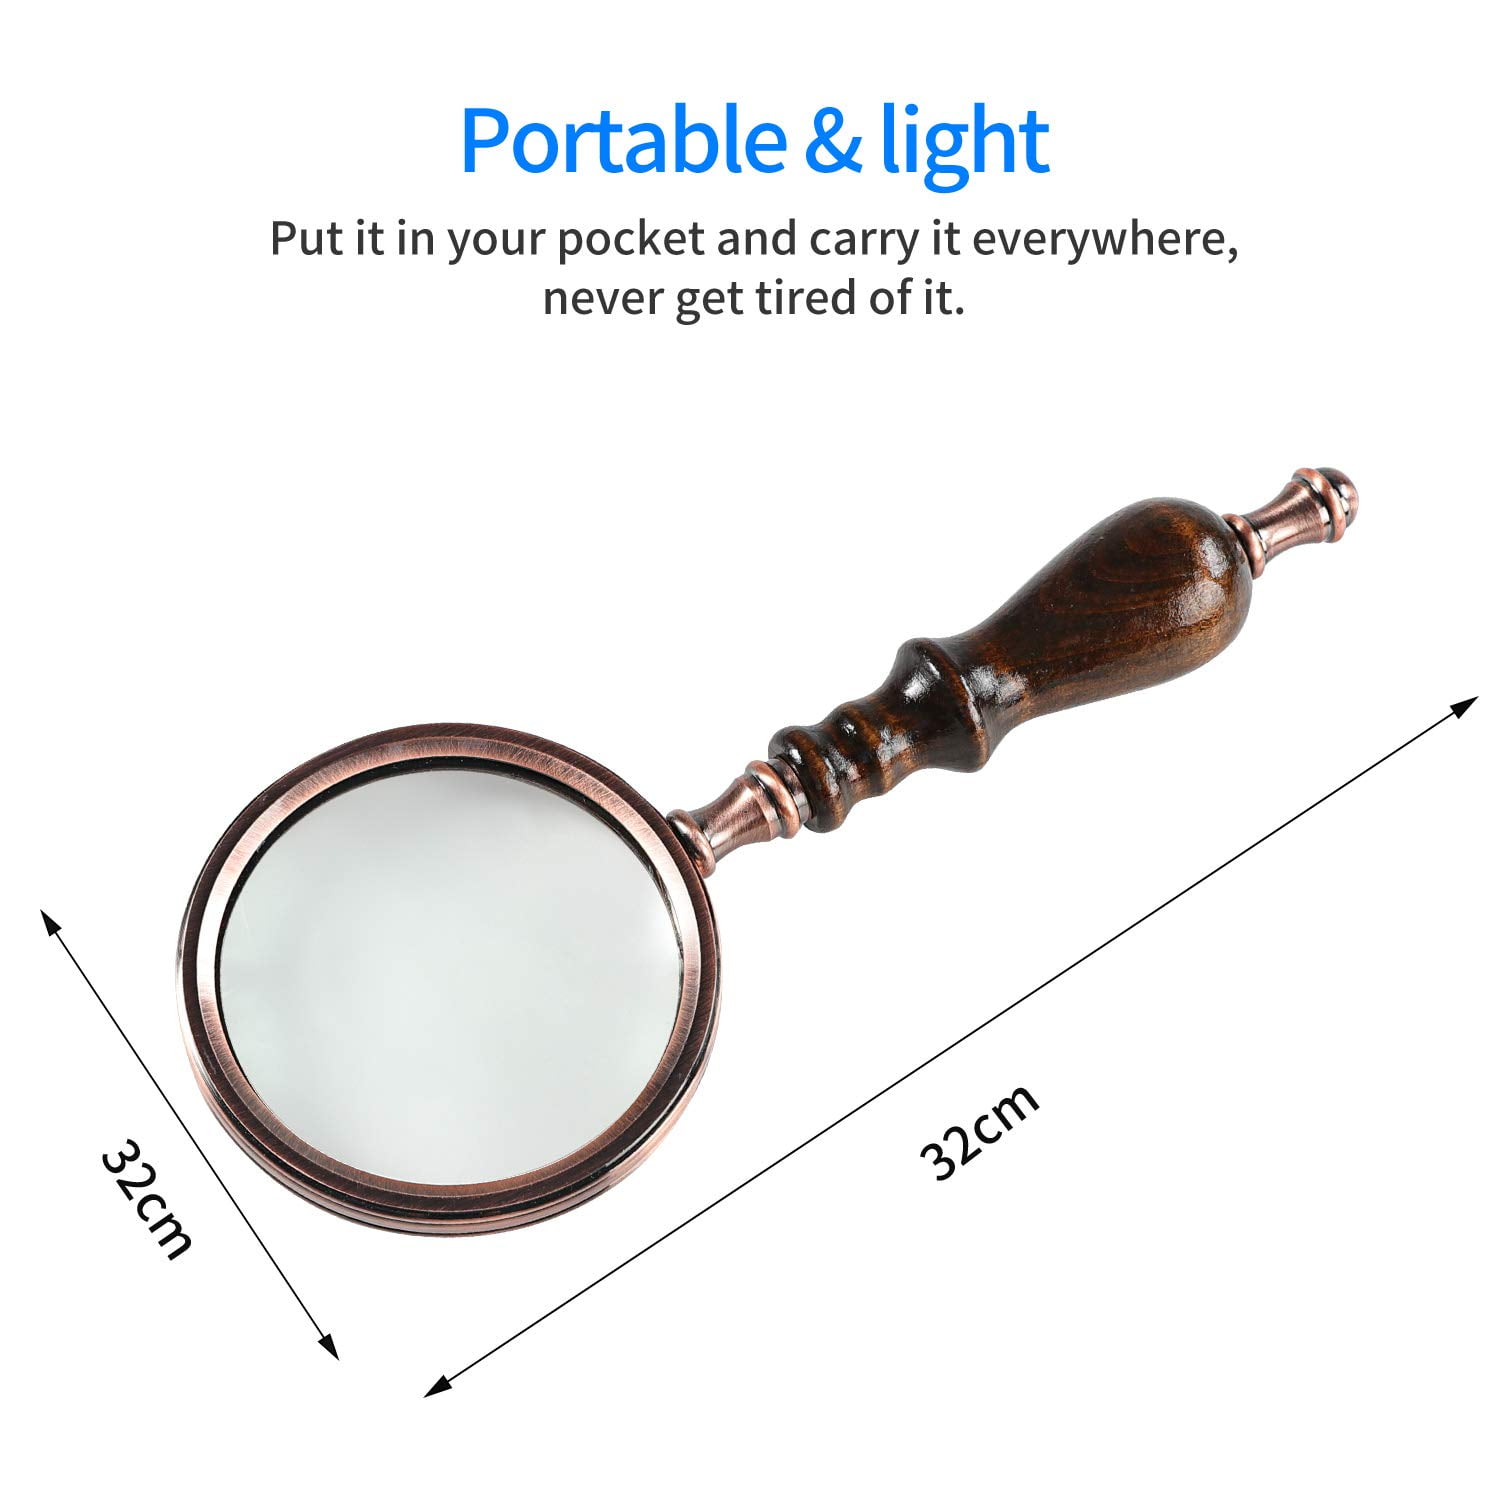 10X Magnifying Glass HD Lens Redwood Handle Large Handheld Magnifier for Kids Jewellers Reading Newspaper Books Elderly The Best Gift Loupe ZHXZHXMY Visually impaired Assistance 